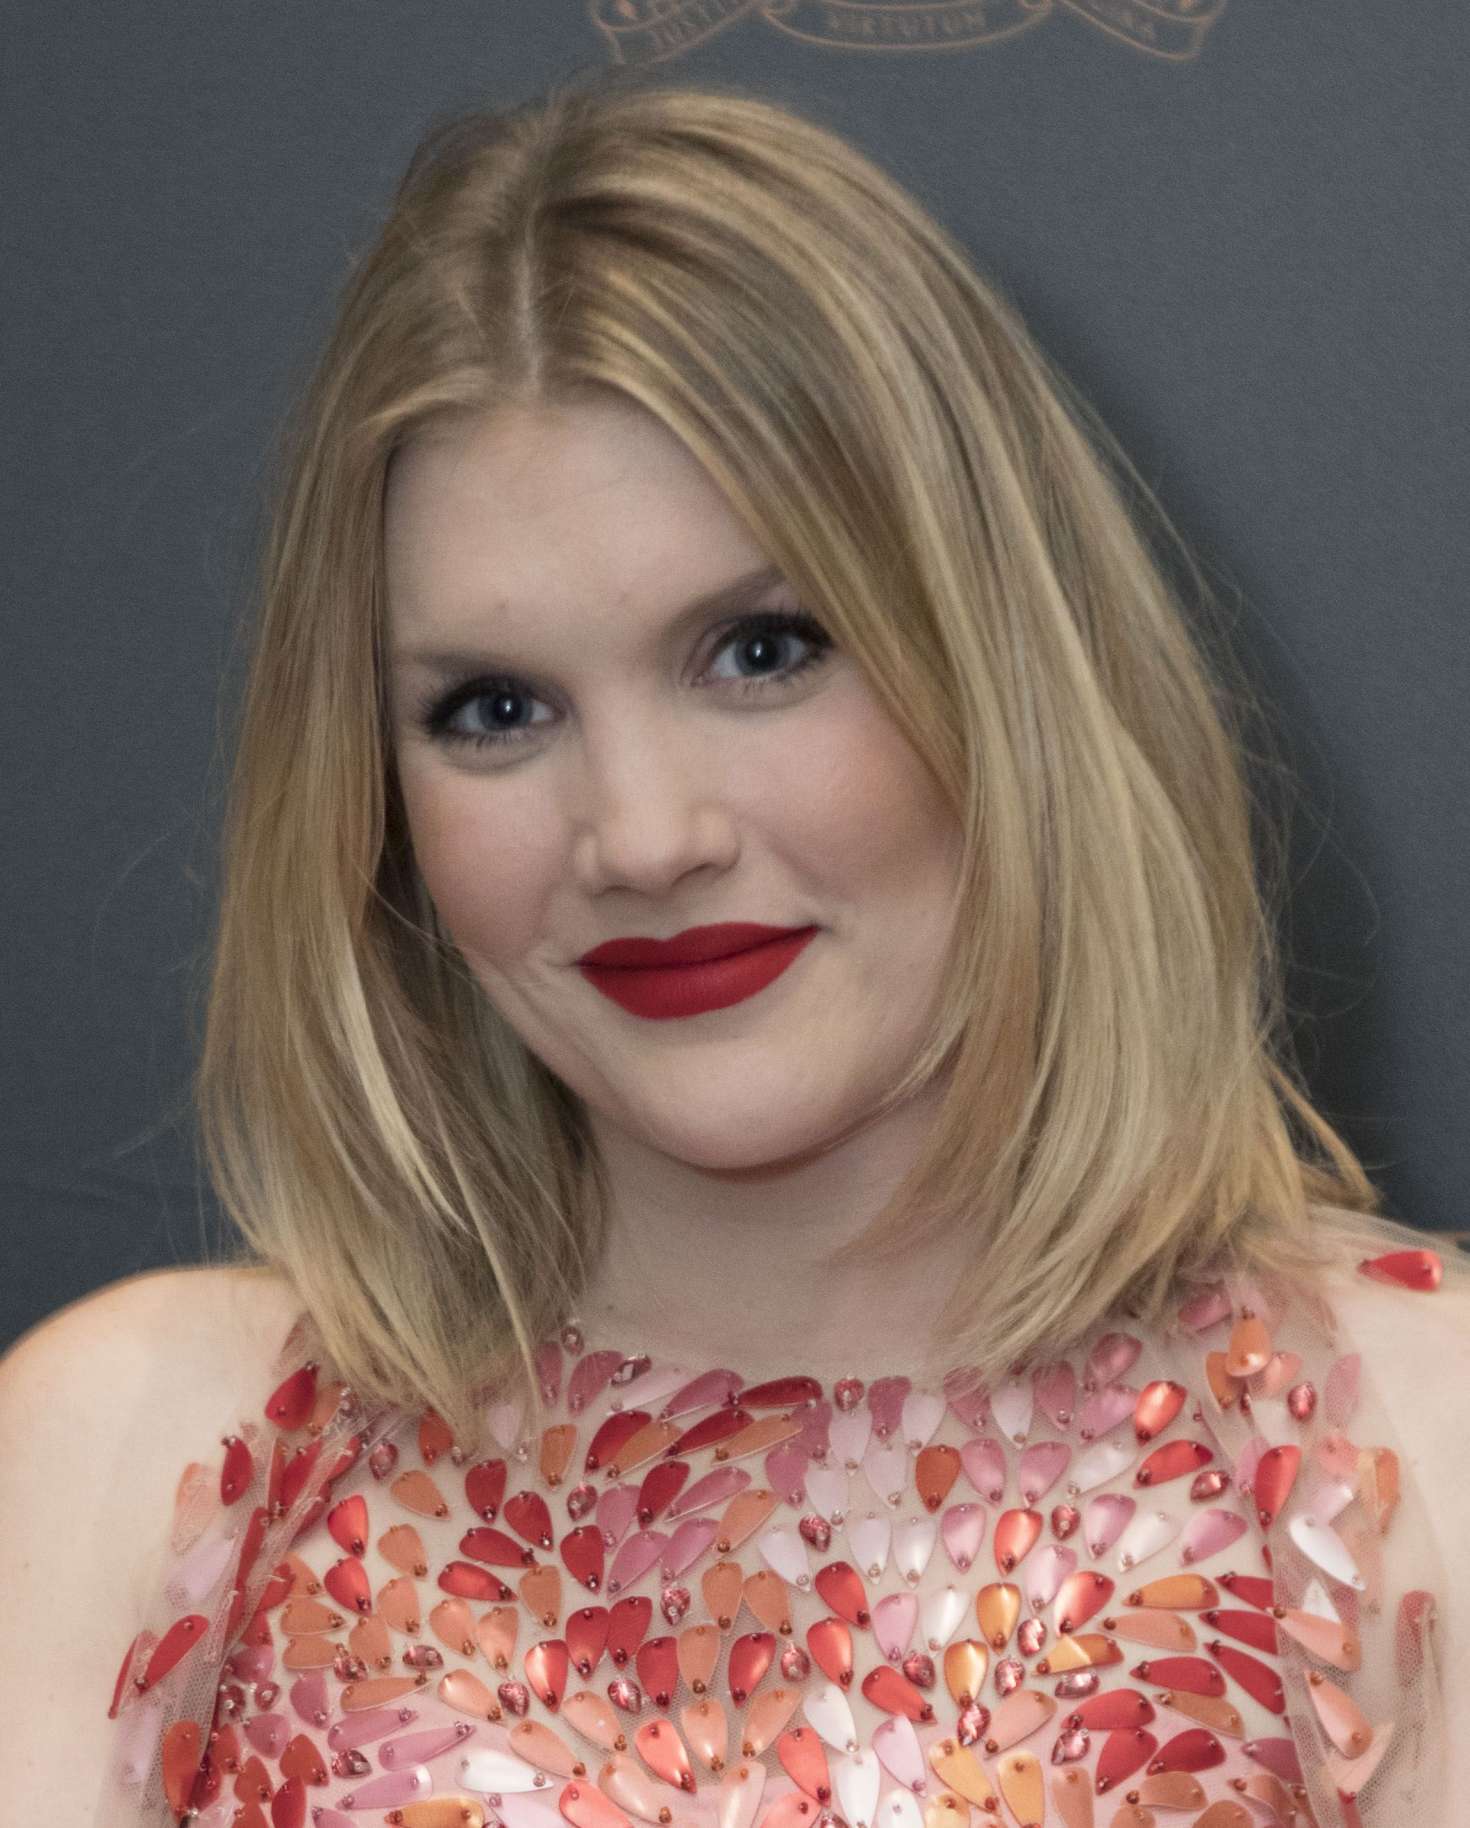 Emerald Fennell: The Leopards Awards in aid of The Princes Trust ...